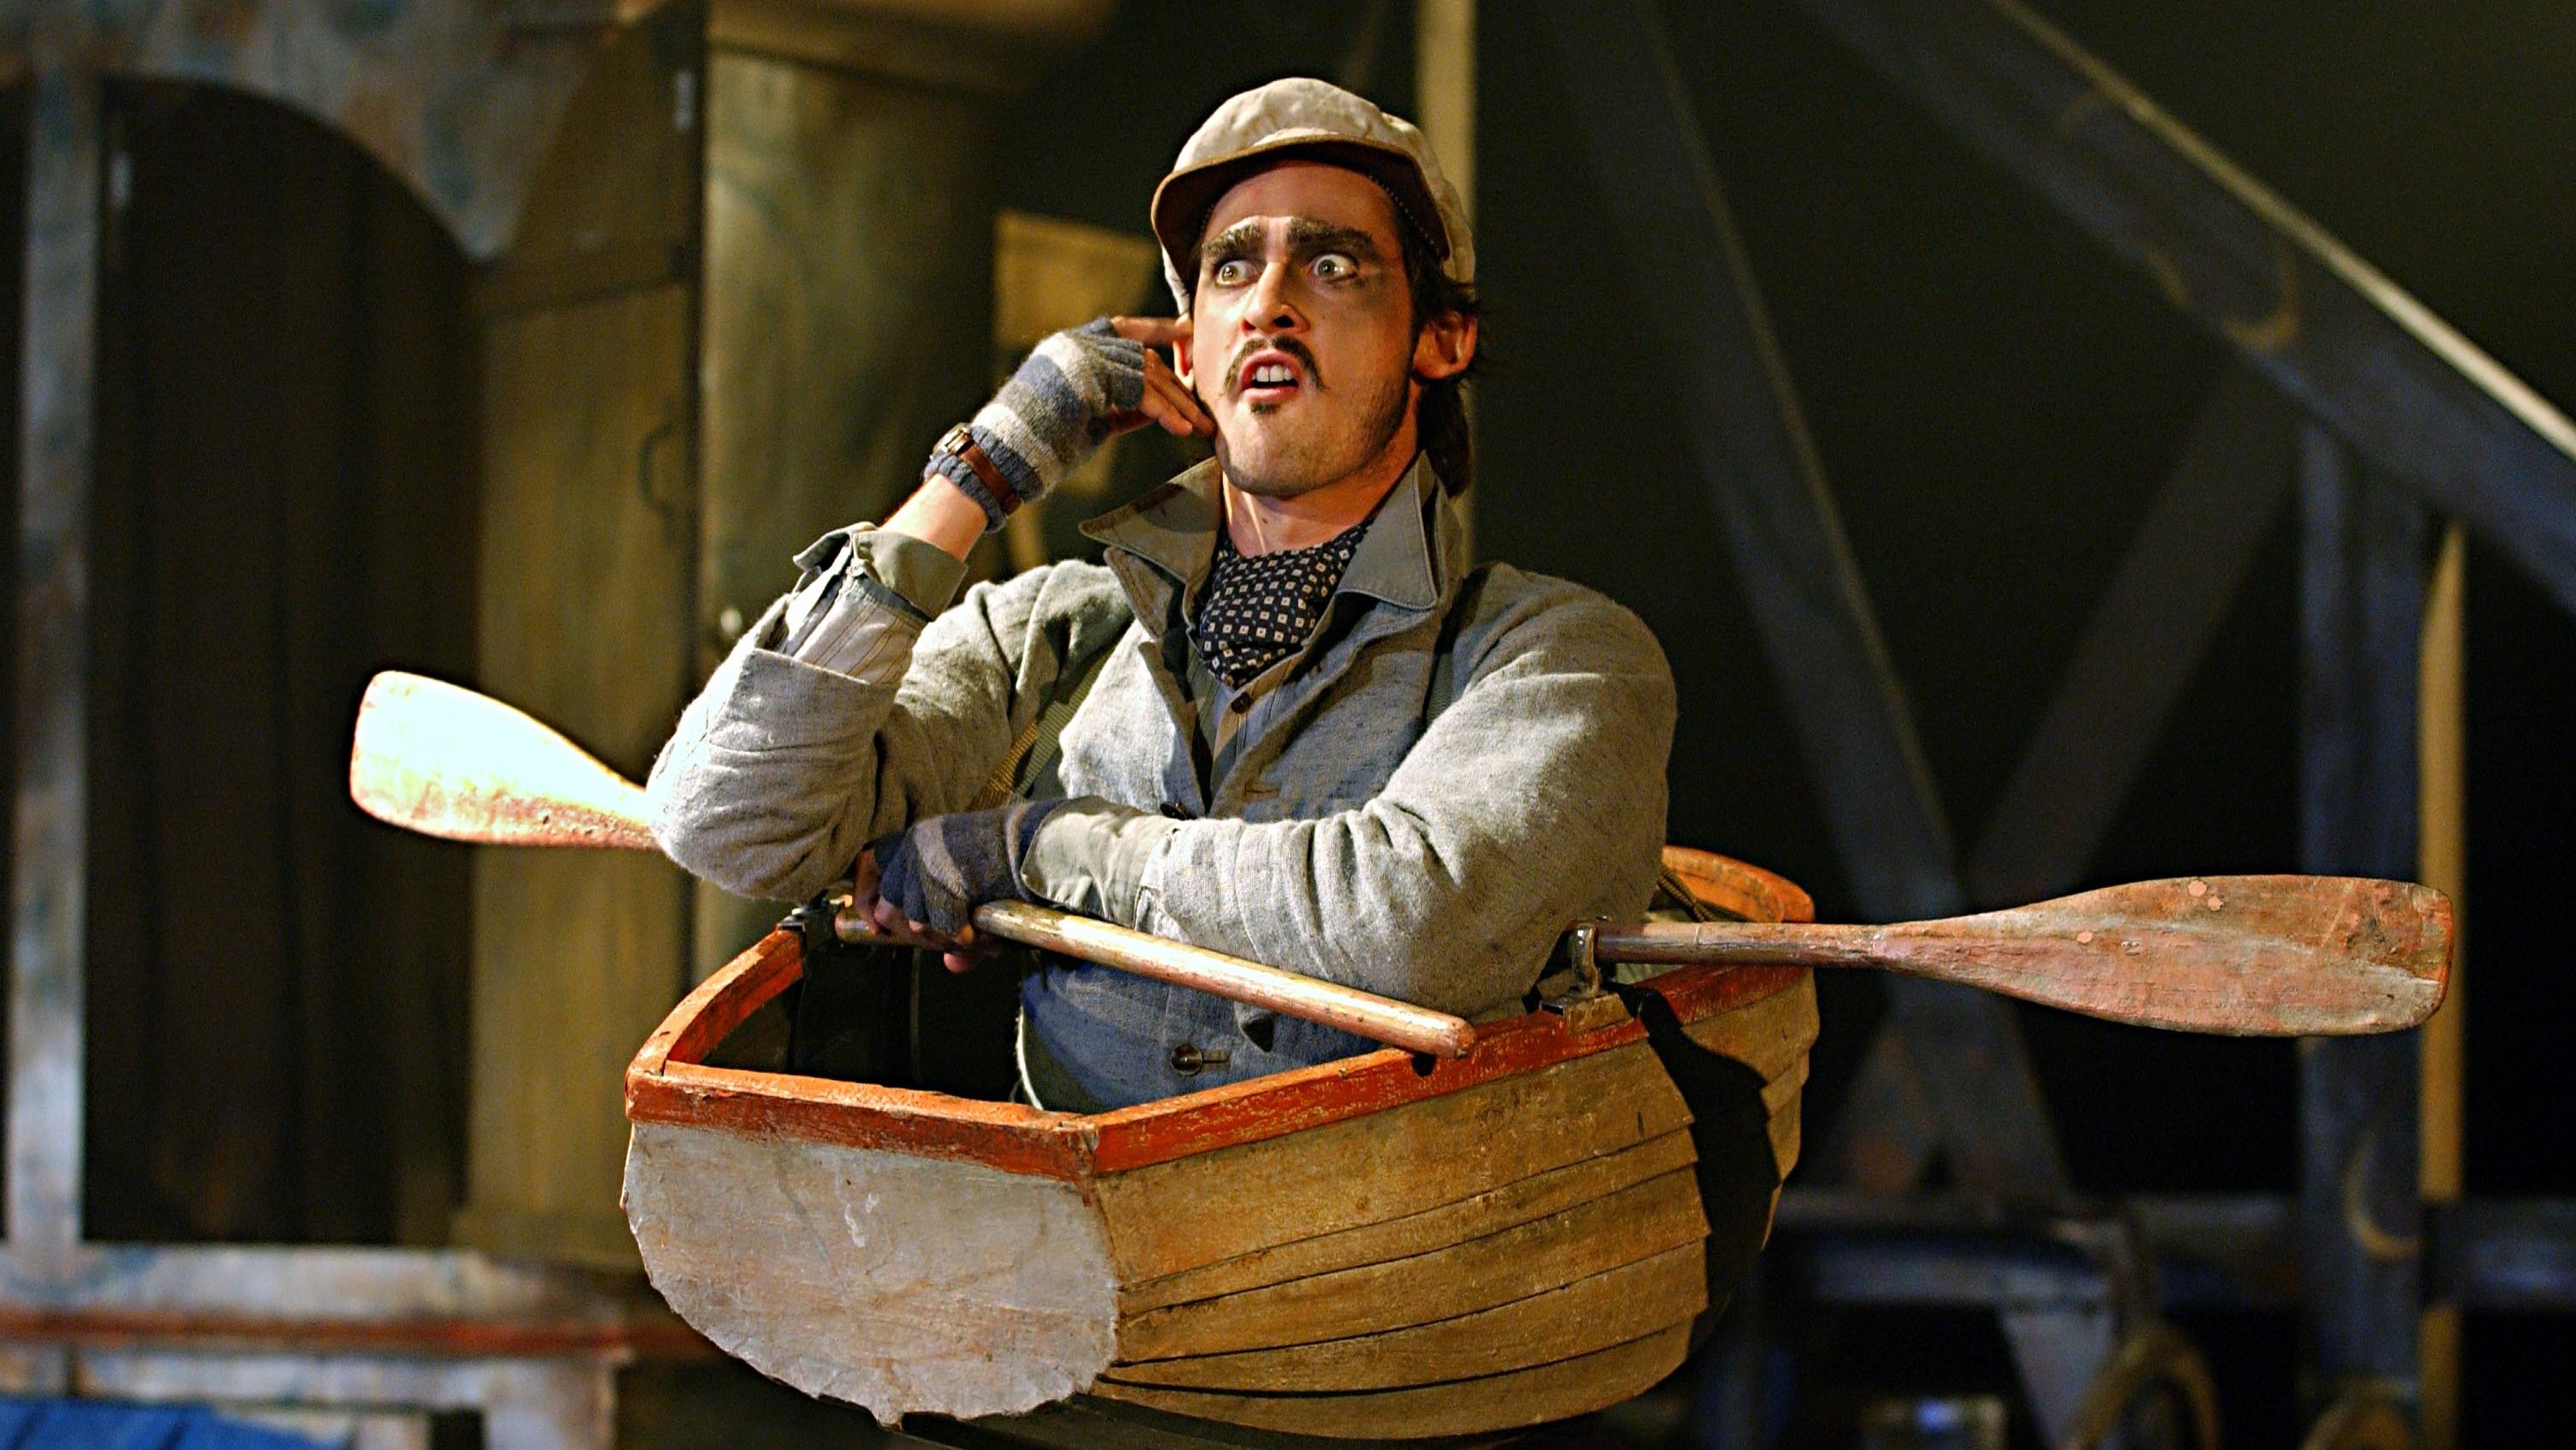 Will Kemp, 'The Wind in the Willows' at the Linbury Studio Theatre Covent Garden, London, 2003